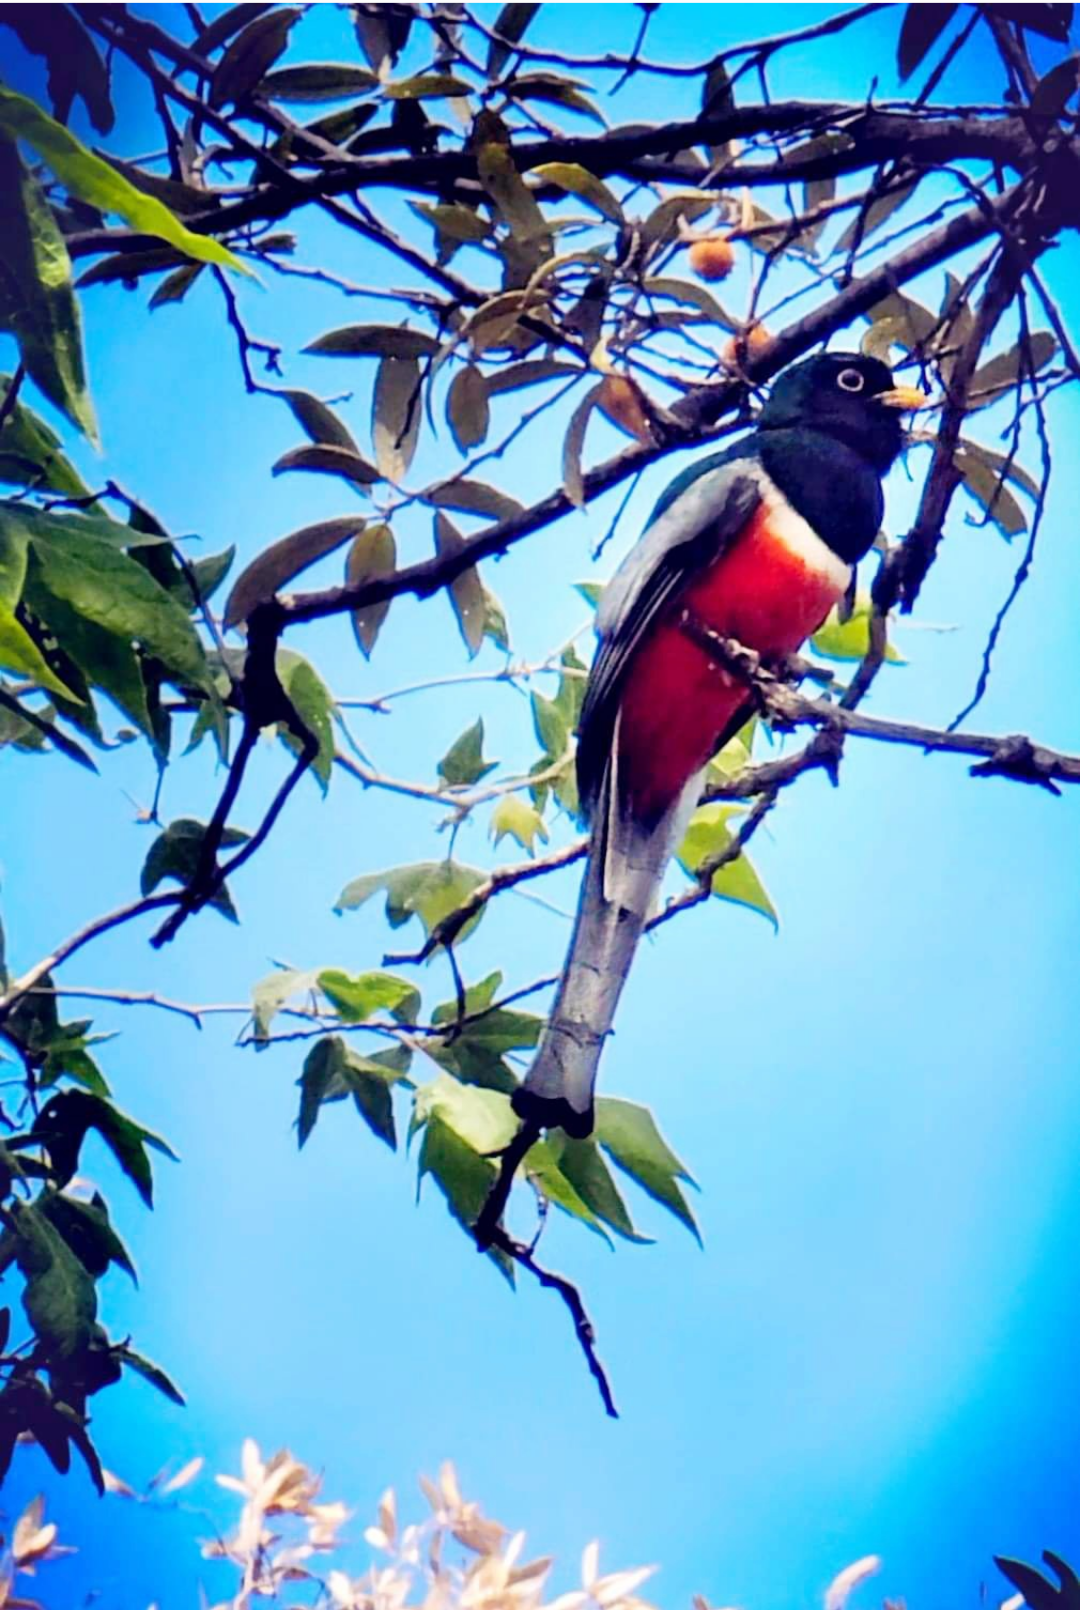 Photo by Anna Pacheco  |  Elegant Trogon sitting in a tree.